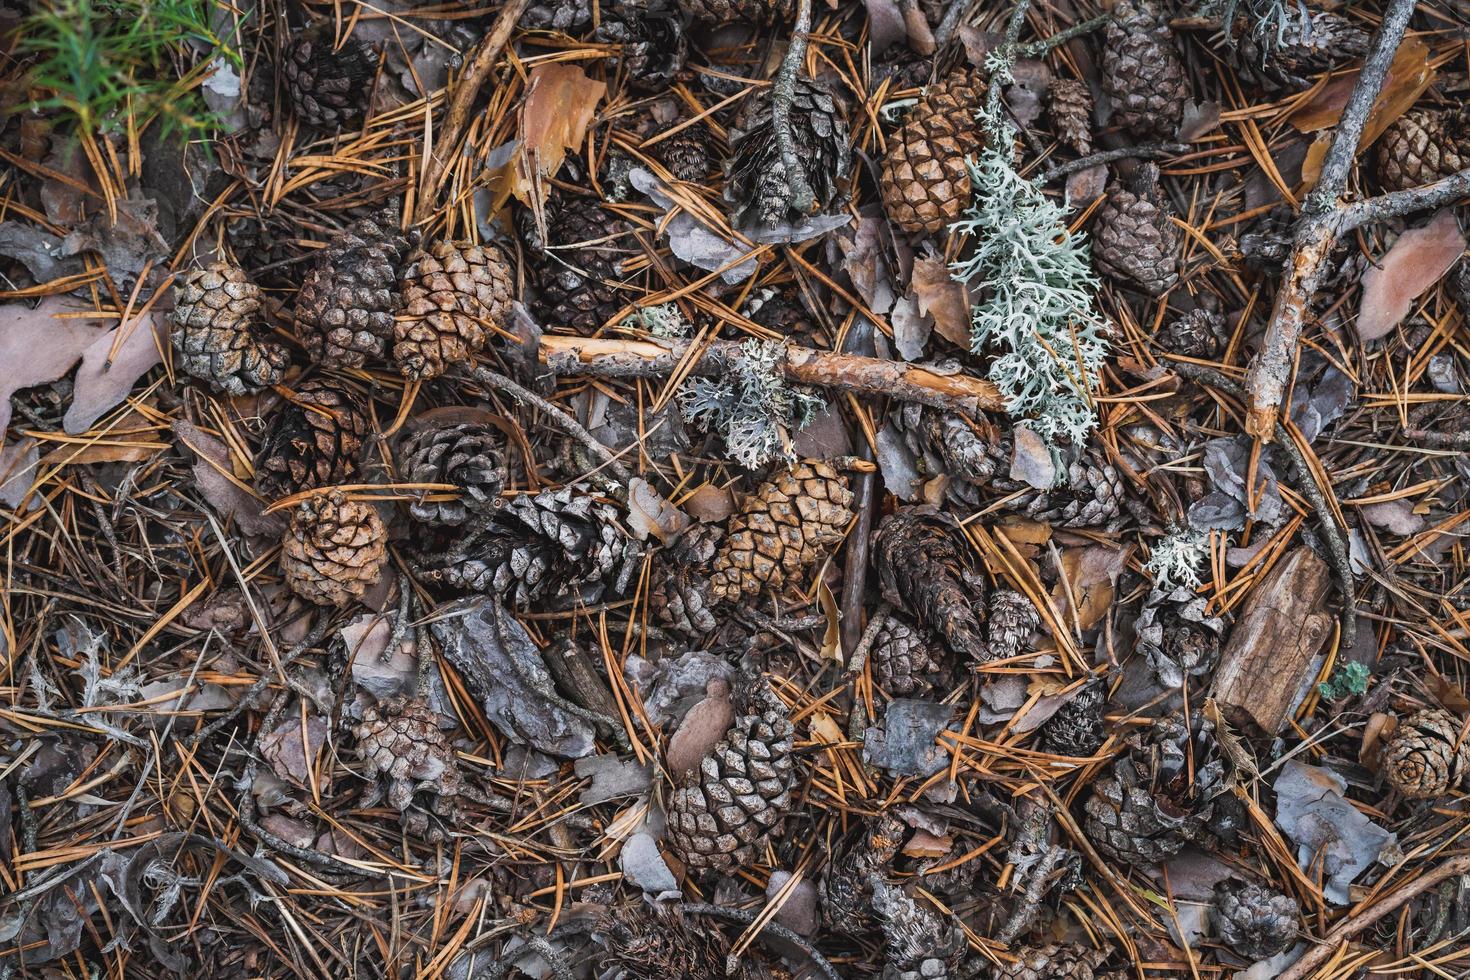 A forest floor covered in pinecones, leaves, bark and shrubbery